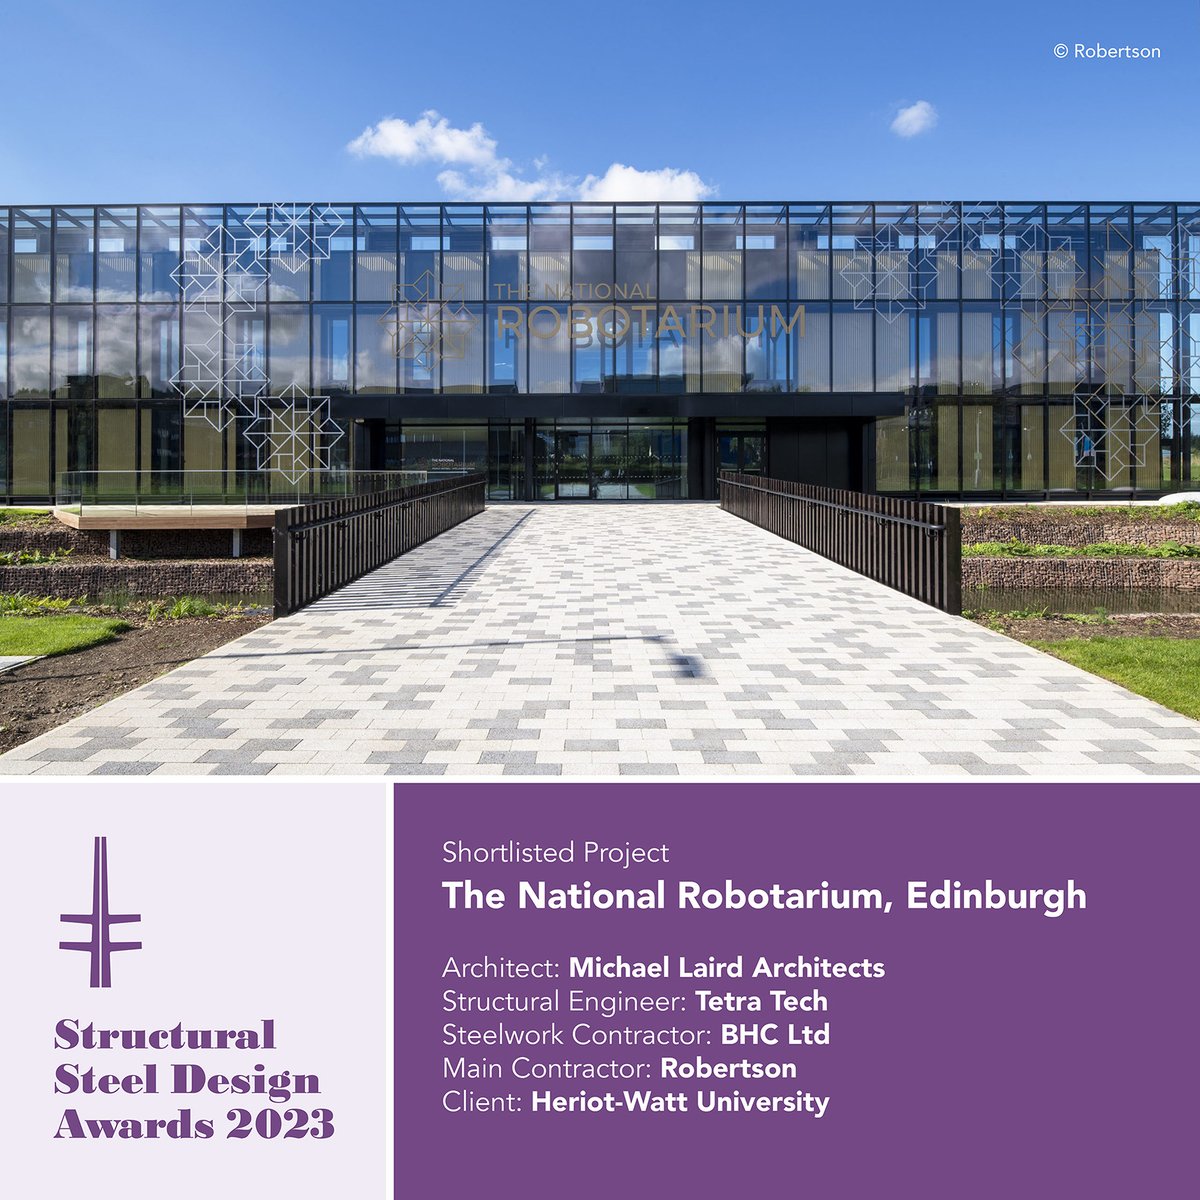 SHORTLISTED PROJECT FOR #SSDA2023

The National Robotarium, Edinburgh

Architect @MLA_Ltd, Structural Engineer @TetraTechEurope, Steelwork Contractor @BHC_Ltd, Main Contractor @RobertsonGroup, Client @HeriotWattUni

Winner/s announced 28 September 2023. 

ow.ly/MY3s50PgbzL